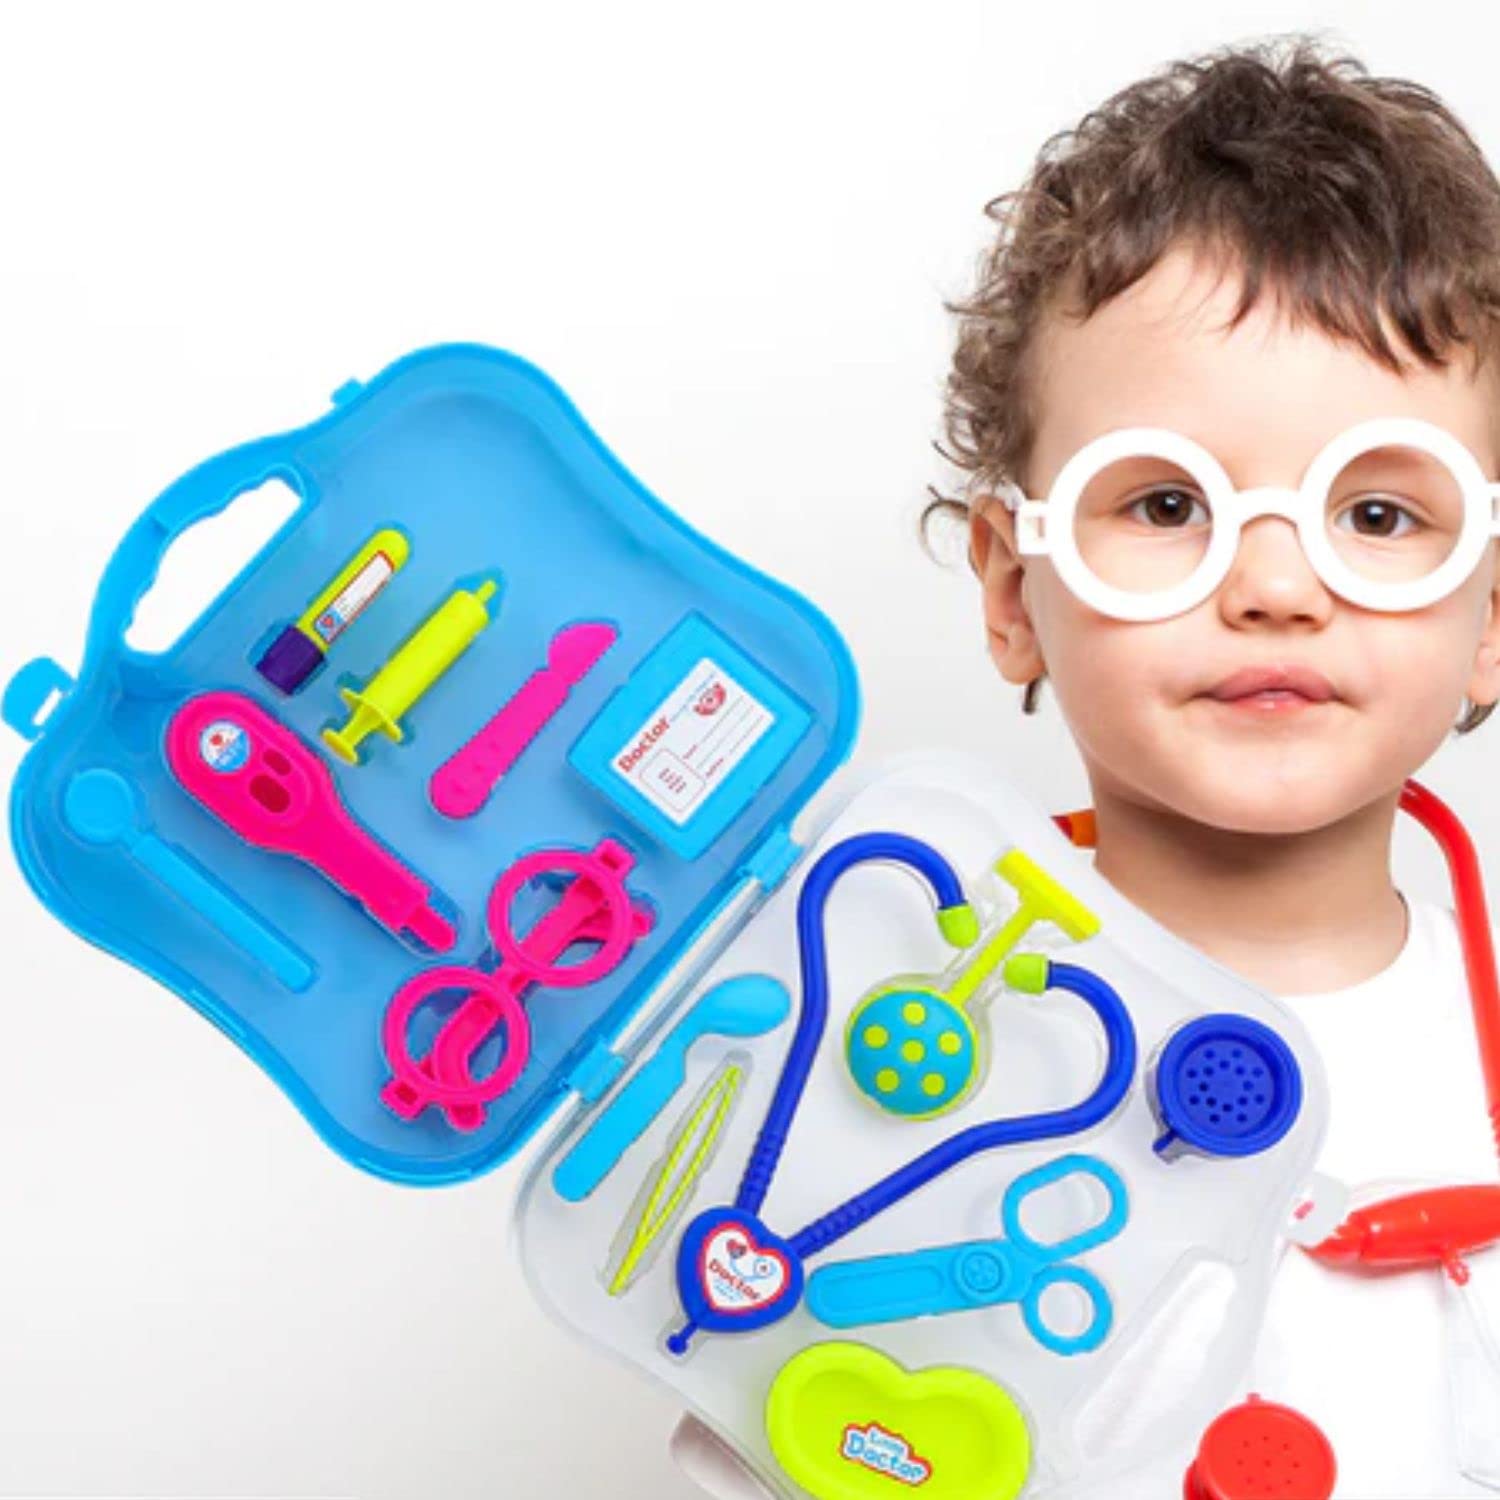 Kids Mandi doctor kit for kids, playset with stethoscope.